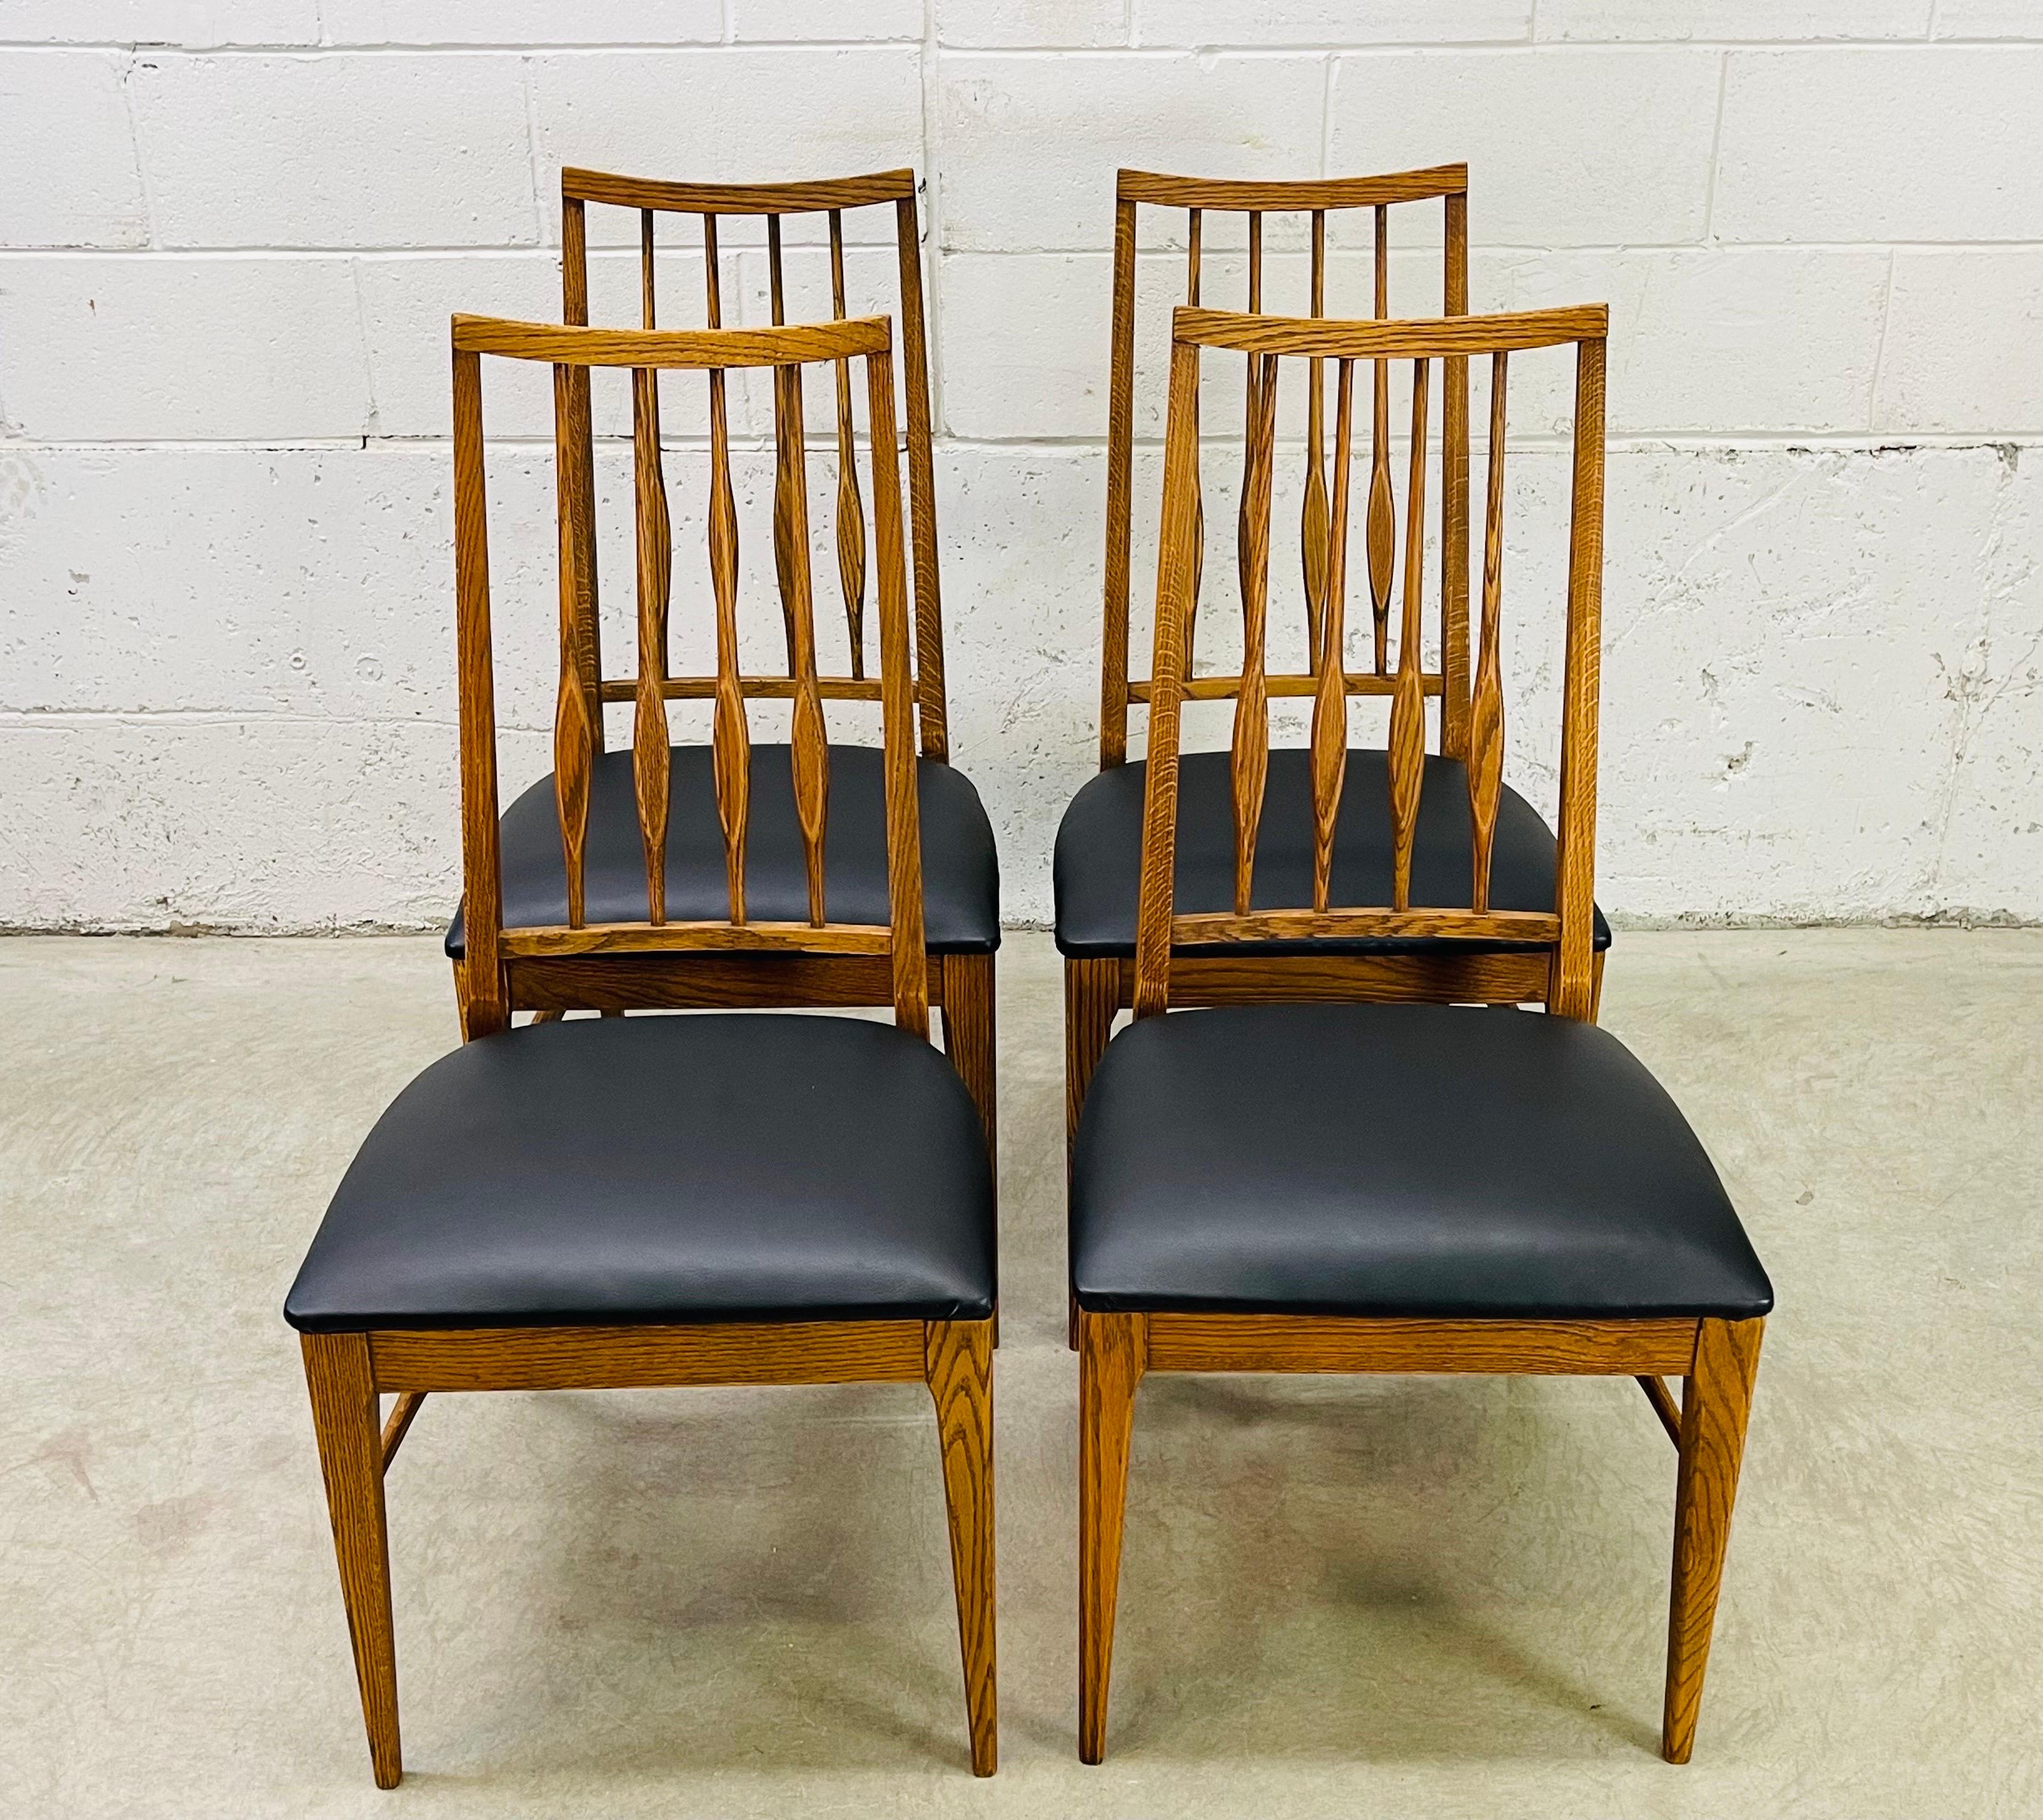 Vintage 1960s set of four oak and ash wood high-back dining room chairs with black naugahyde seats. The dining chairs have a curved back and are very comfortable to sit in. The chairs are in newly refinished condition and are all sturdy. No marks.